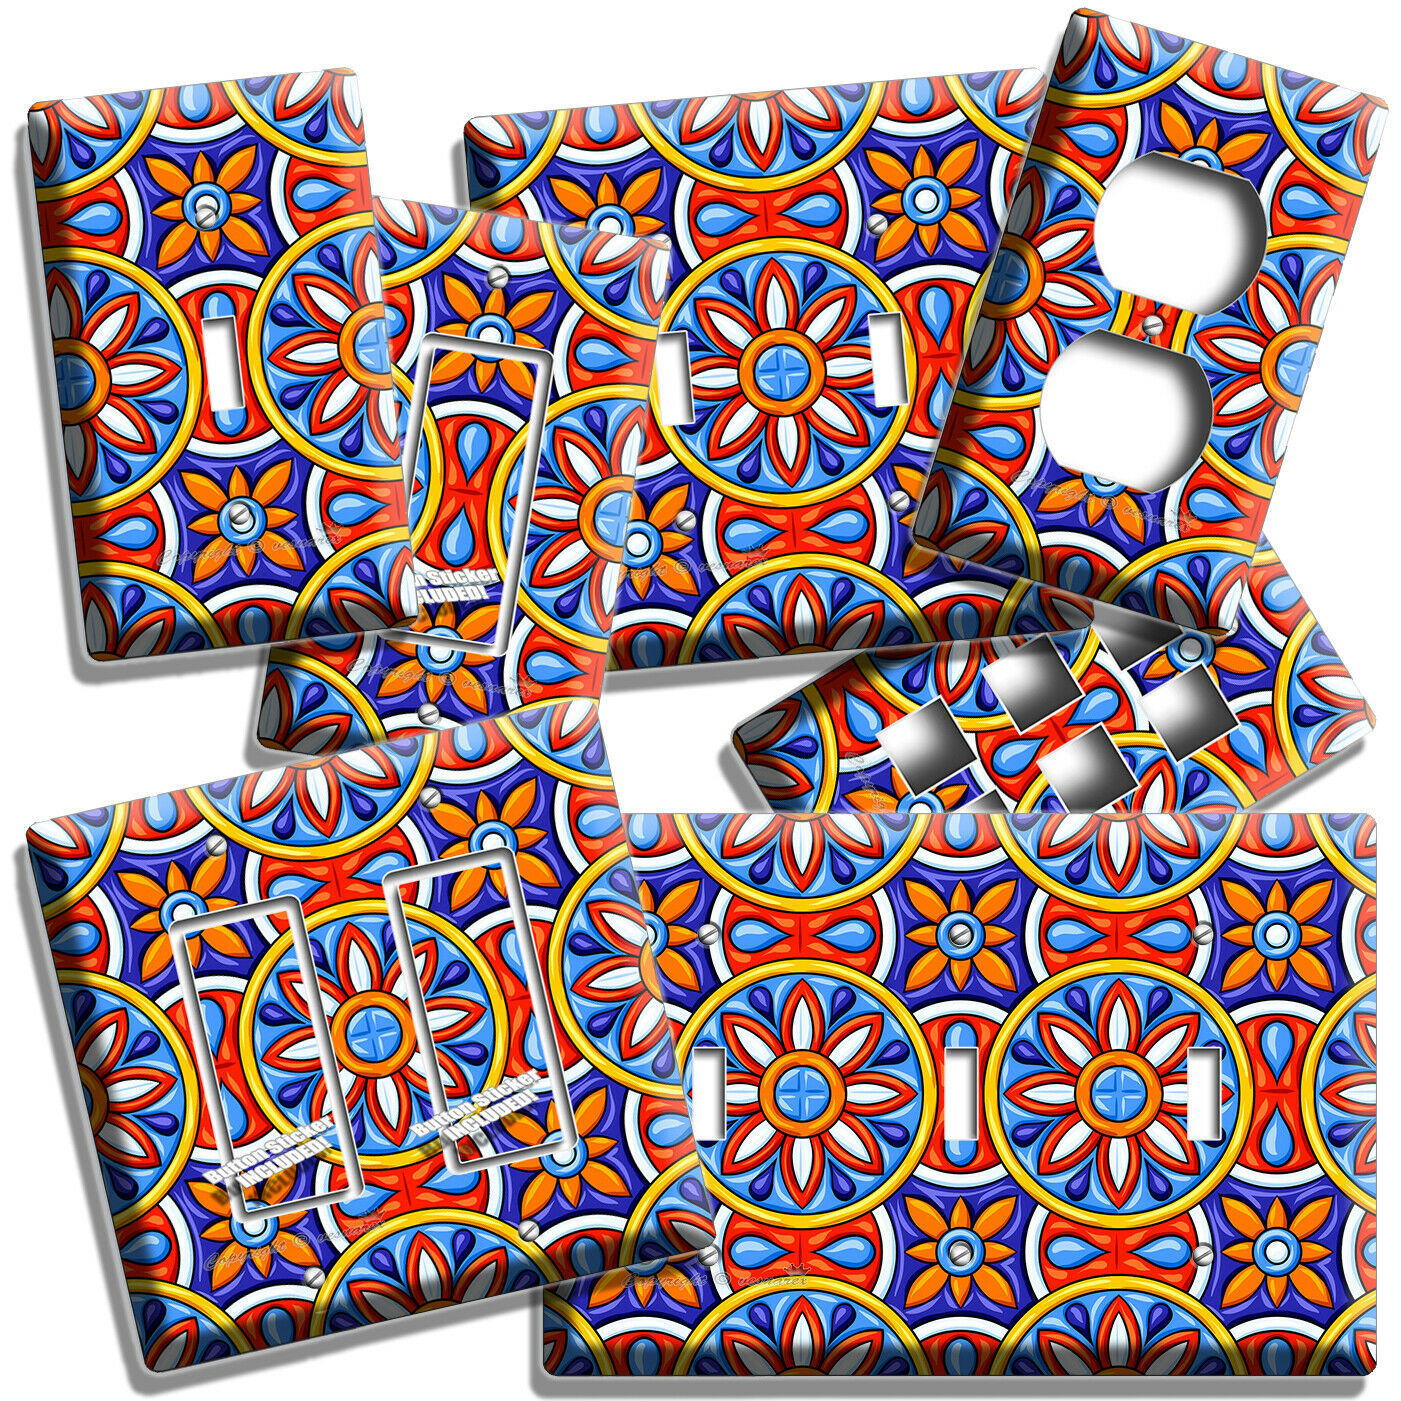 MEXICAN TALAVERA TILE LOOK LIGHT SWITCH OUTLET PLATE KITCHEN FOLK ART ROOM DECOR - $16.19 - $26.09